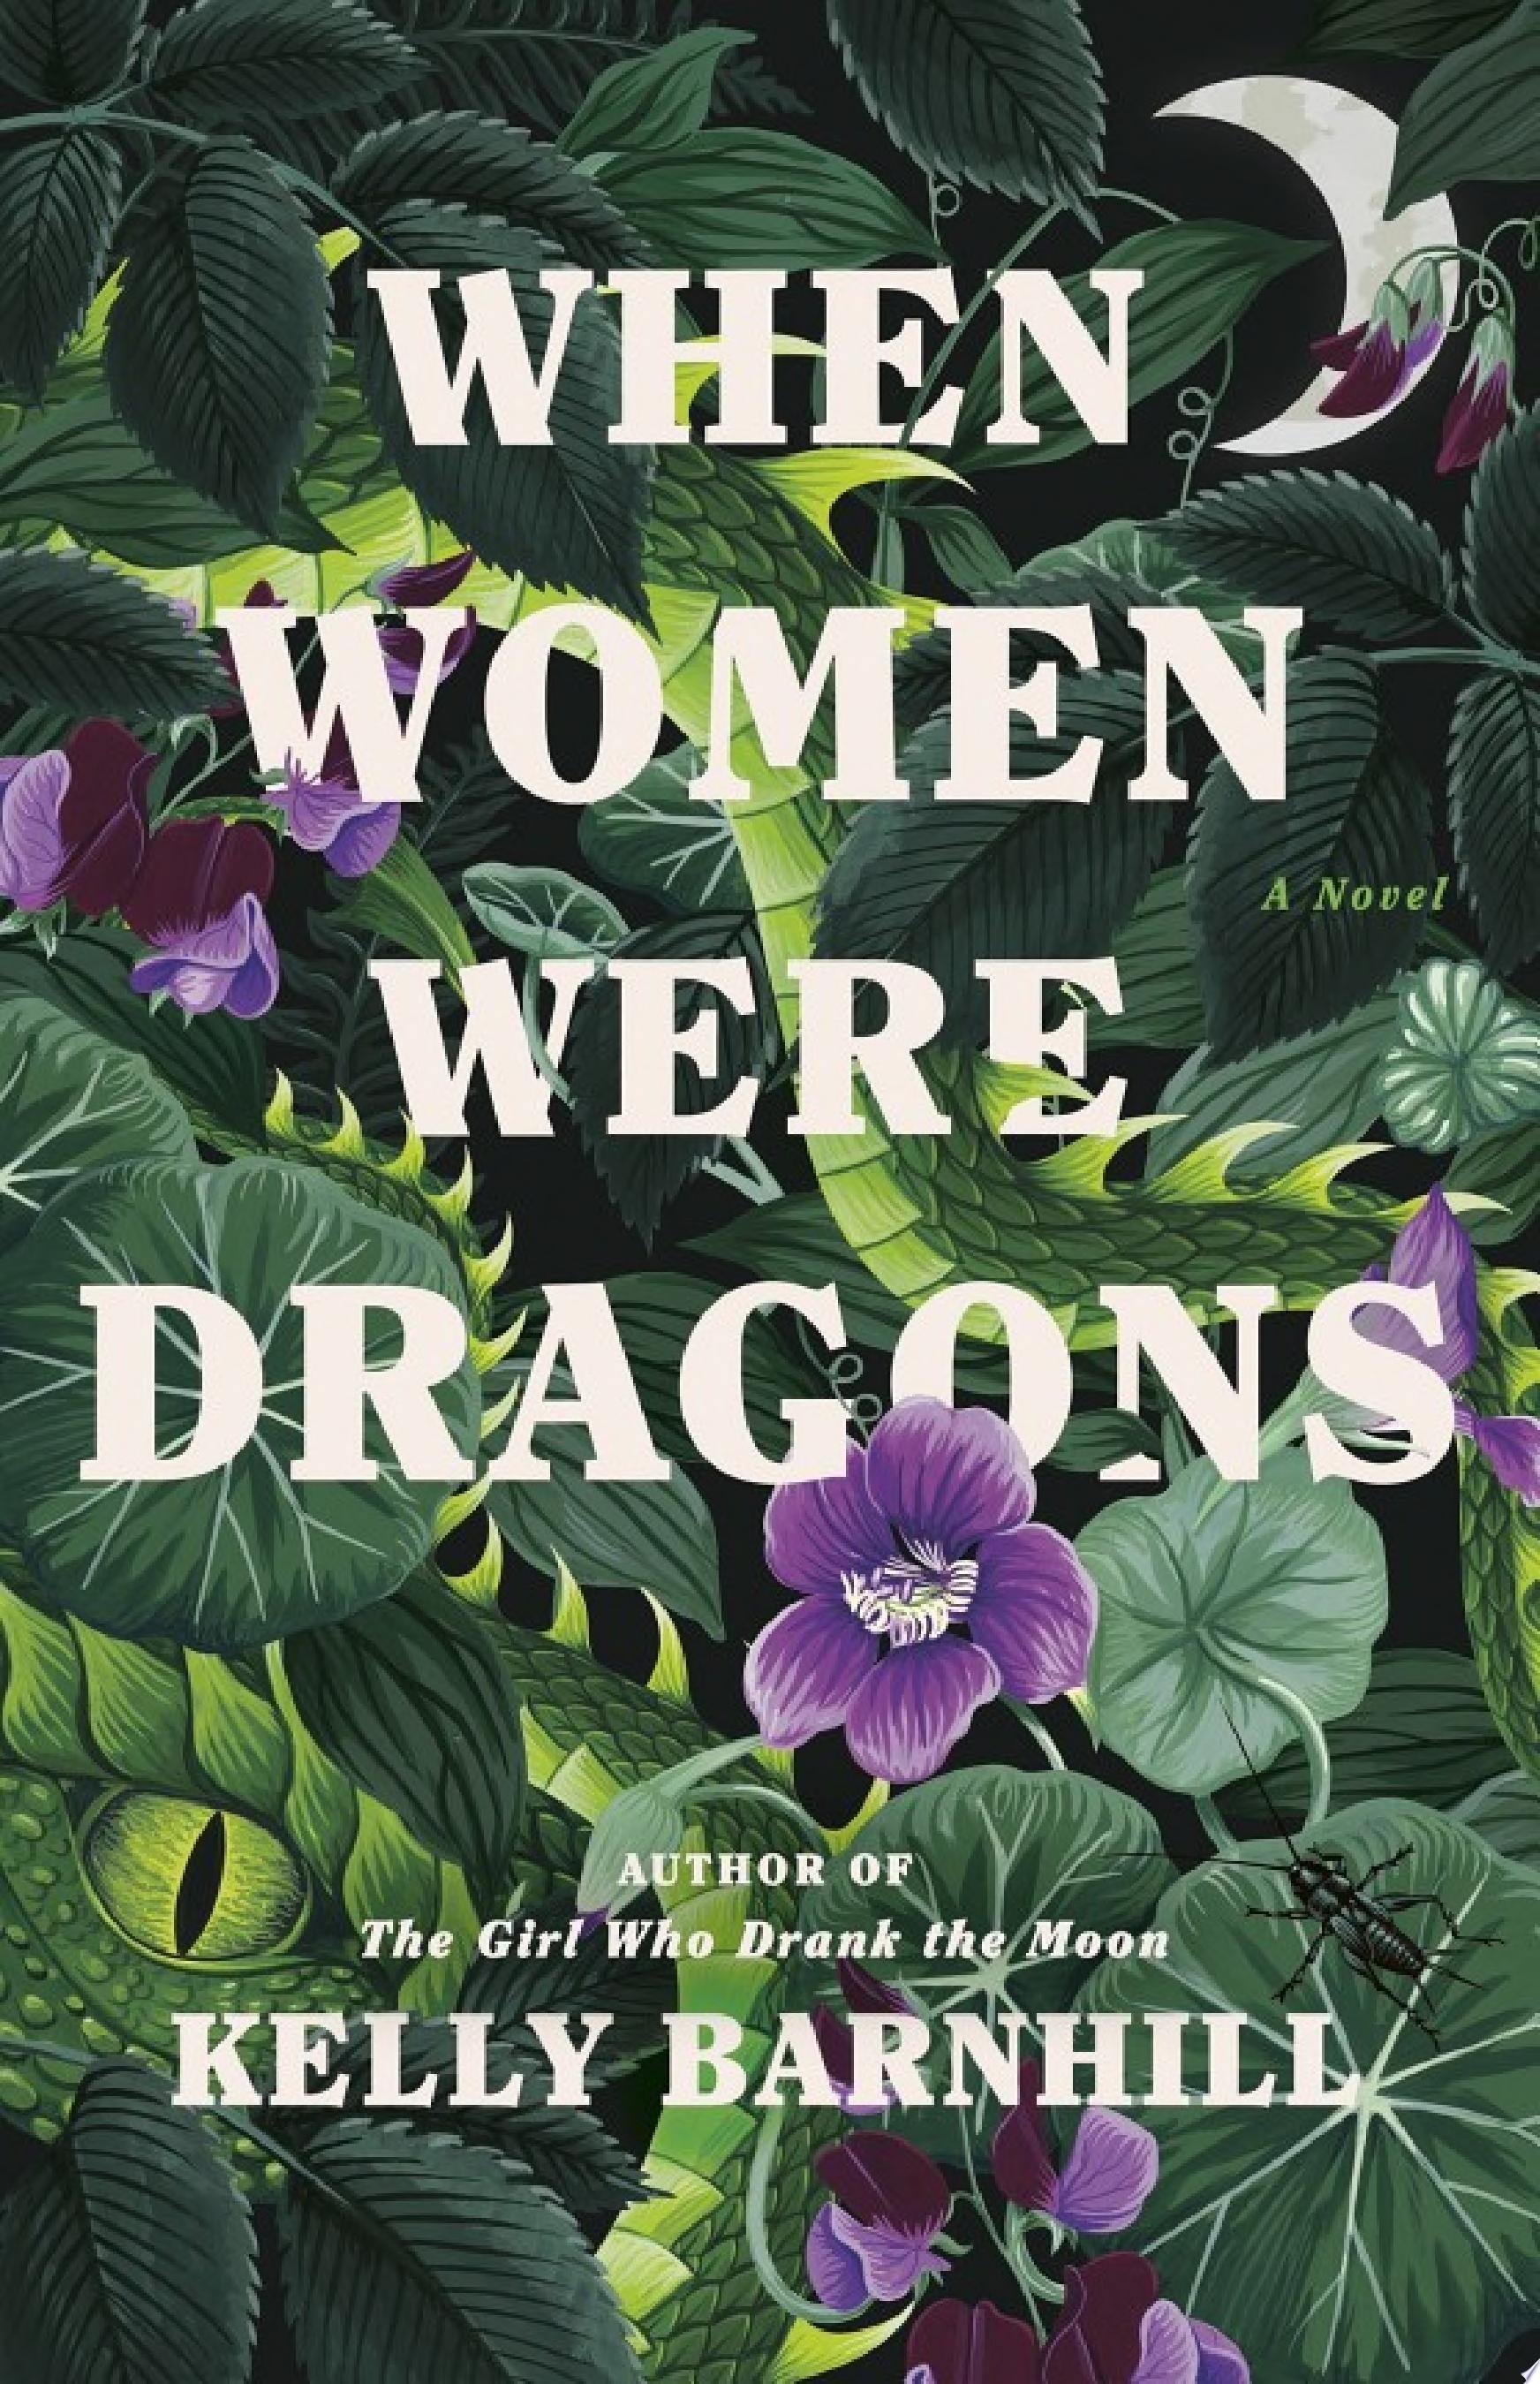 Image for "When Women Were Dragons"